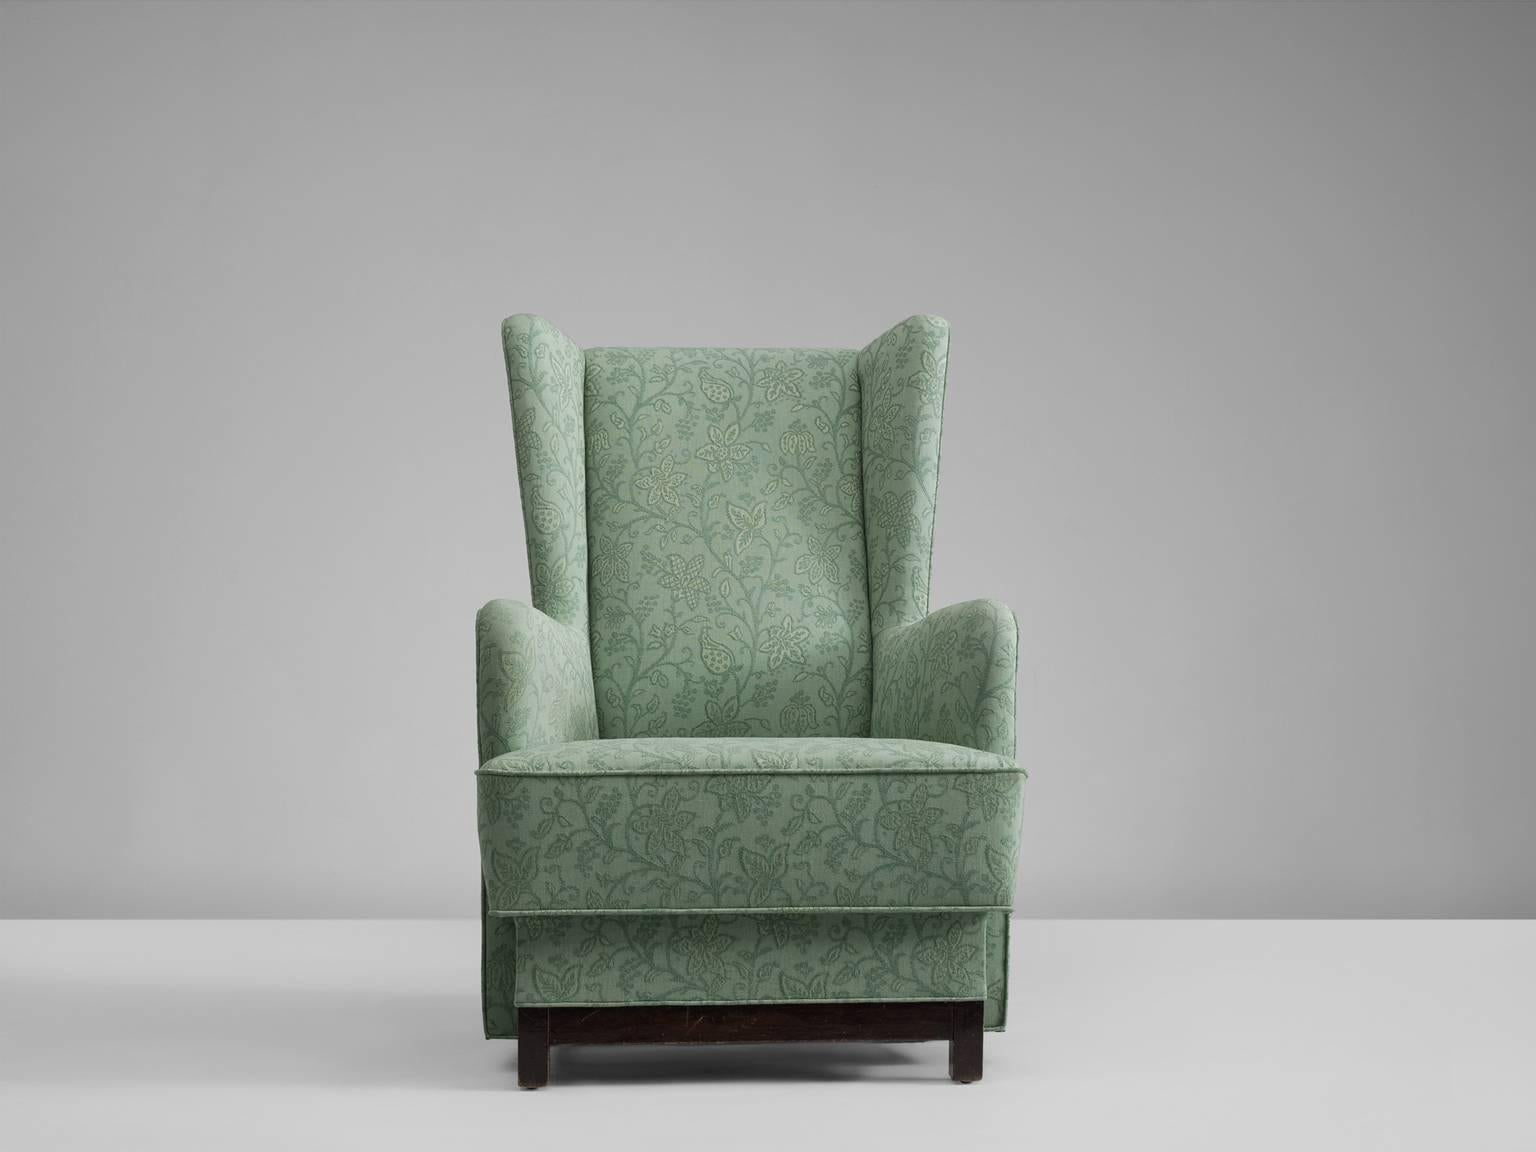 Mid-Century Modern Danish Wing Back Chair in Green Floral Upholstery, 1940s